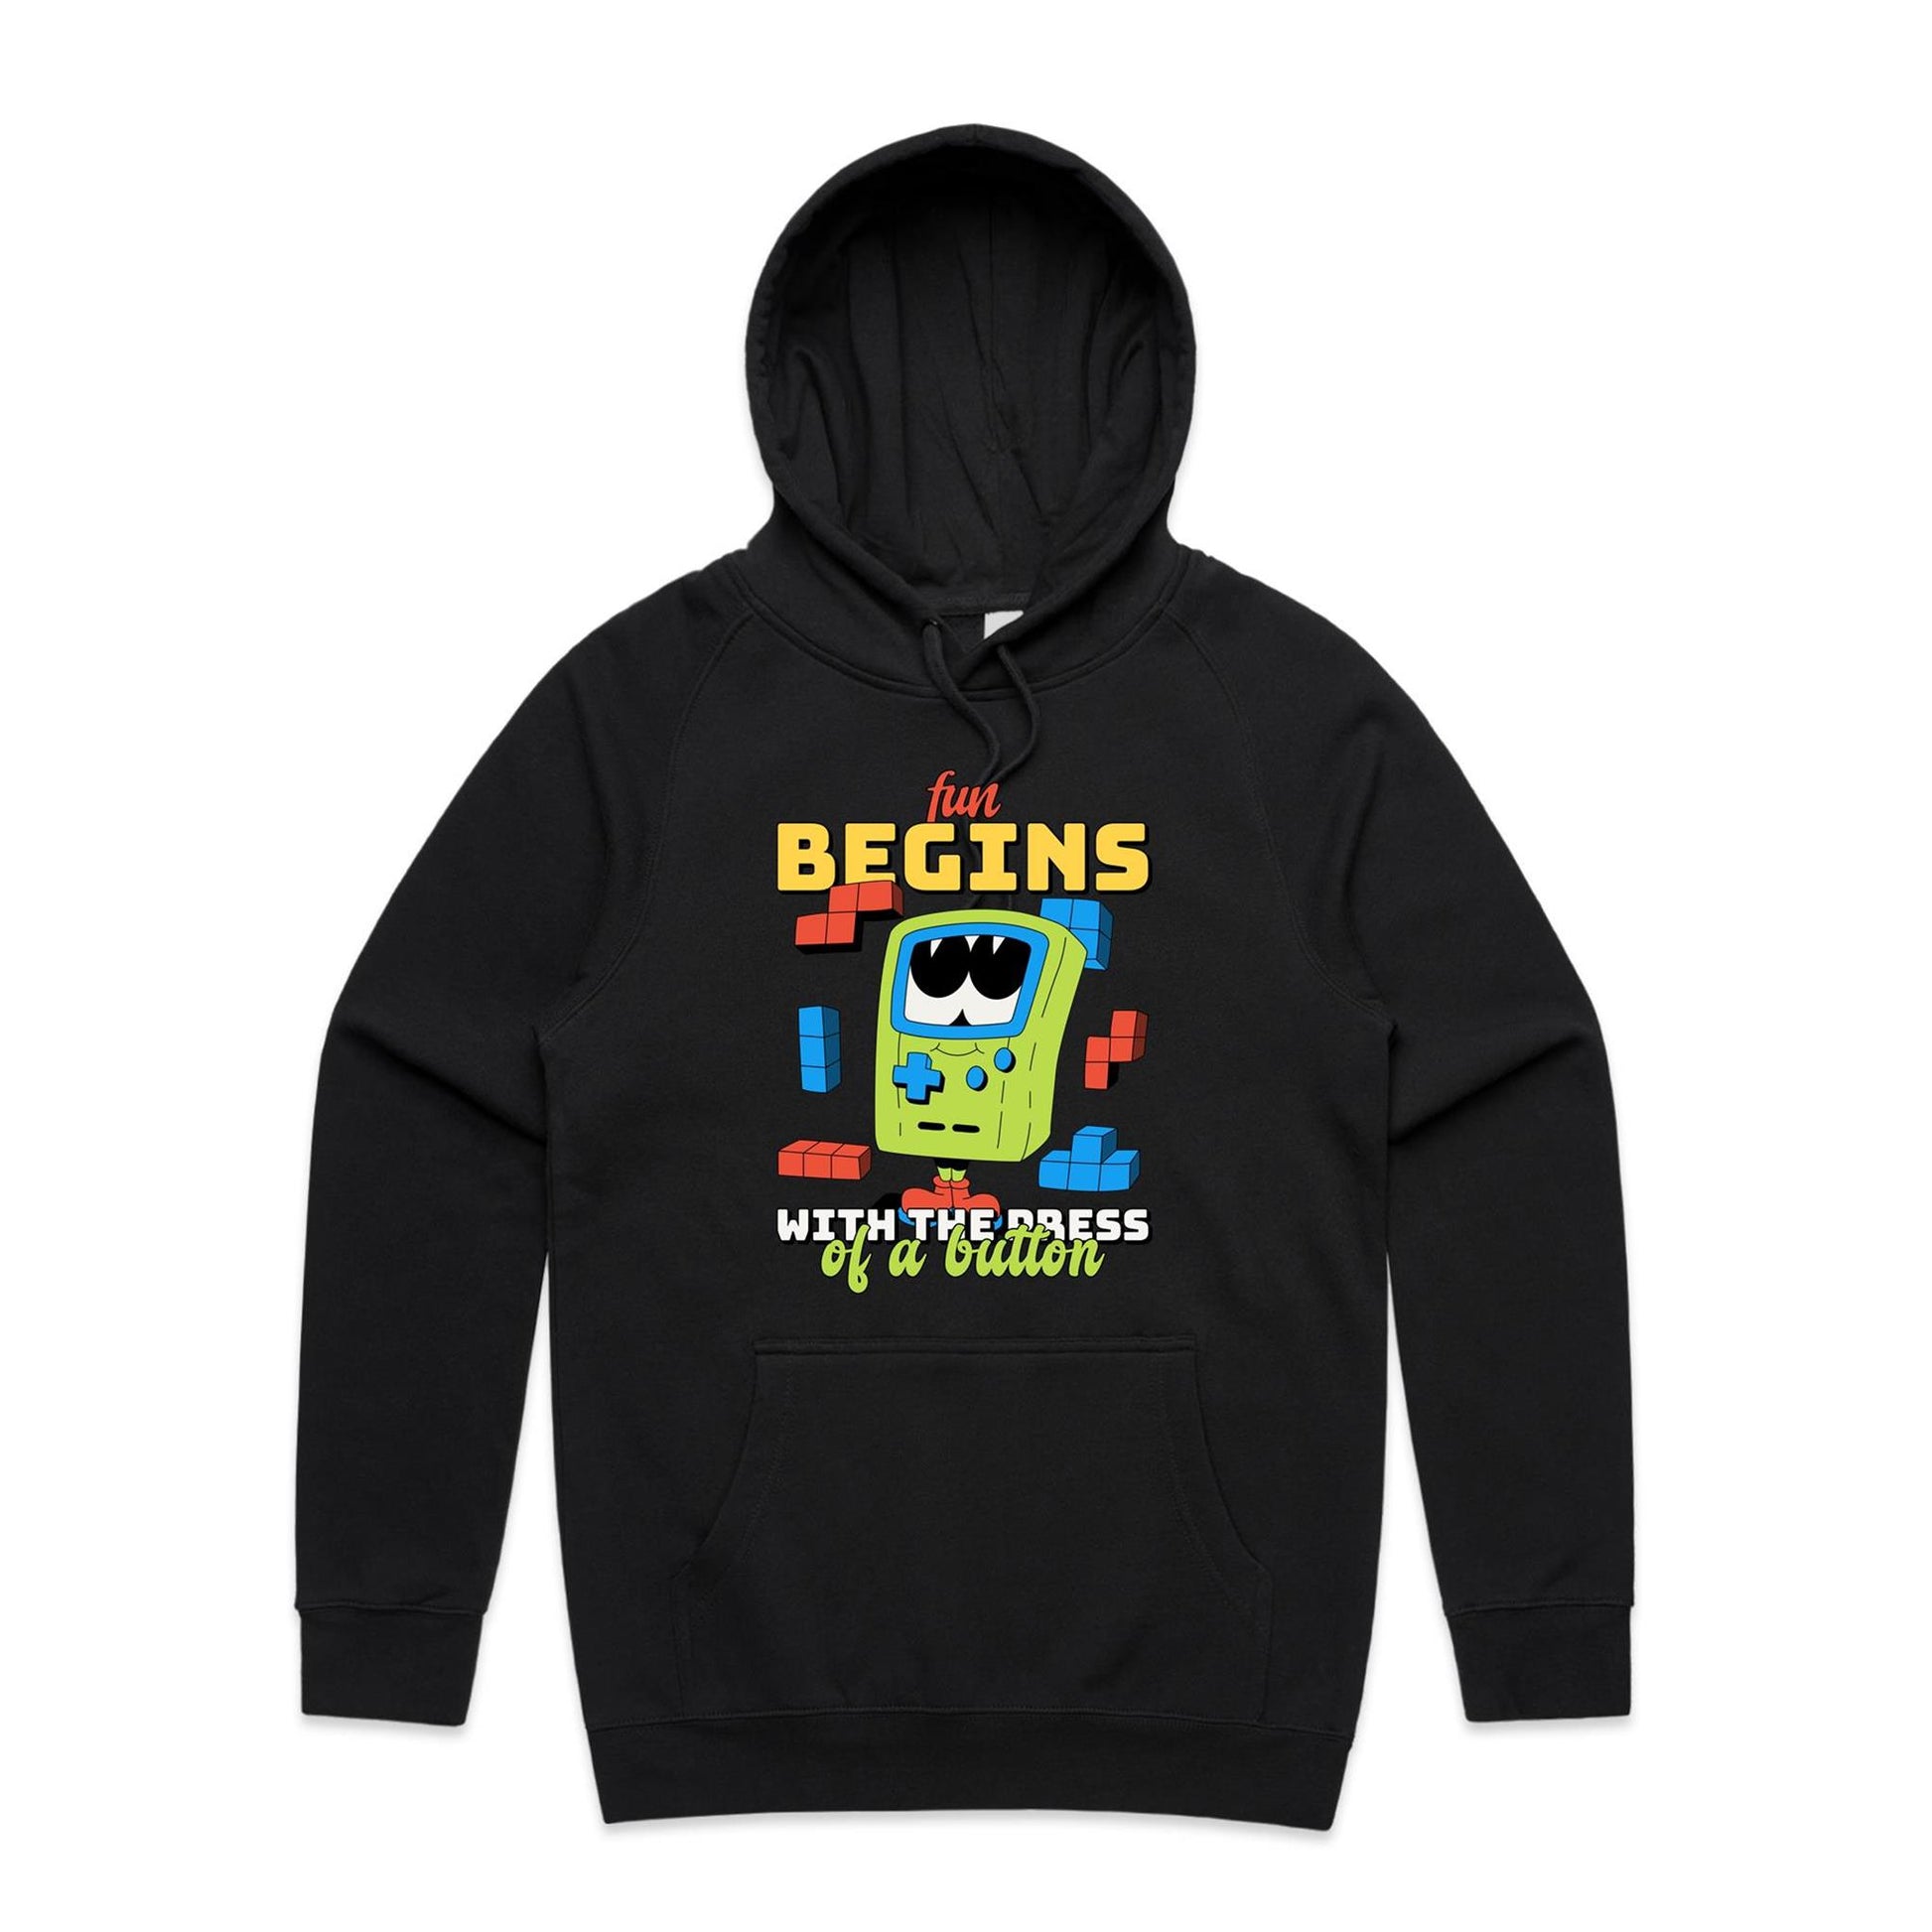 Fun Begins With The Press Of A Button - Supply Hood Black Mens Supply Hoodie Games